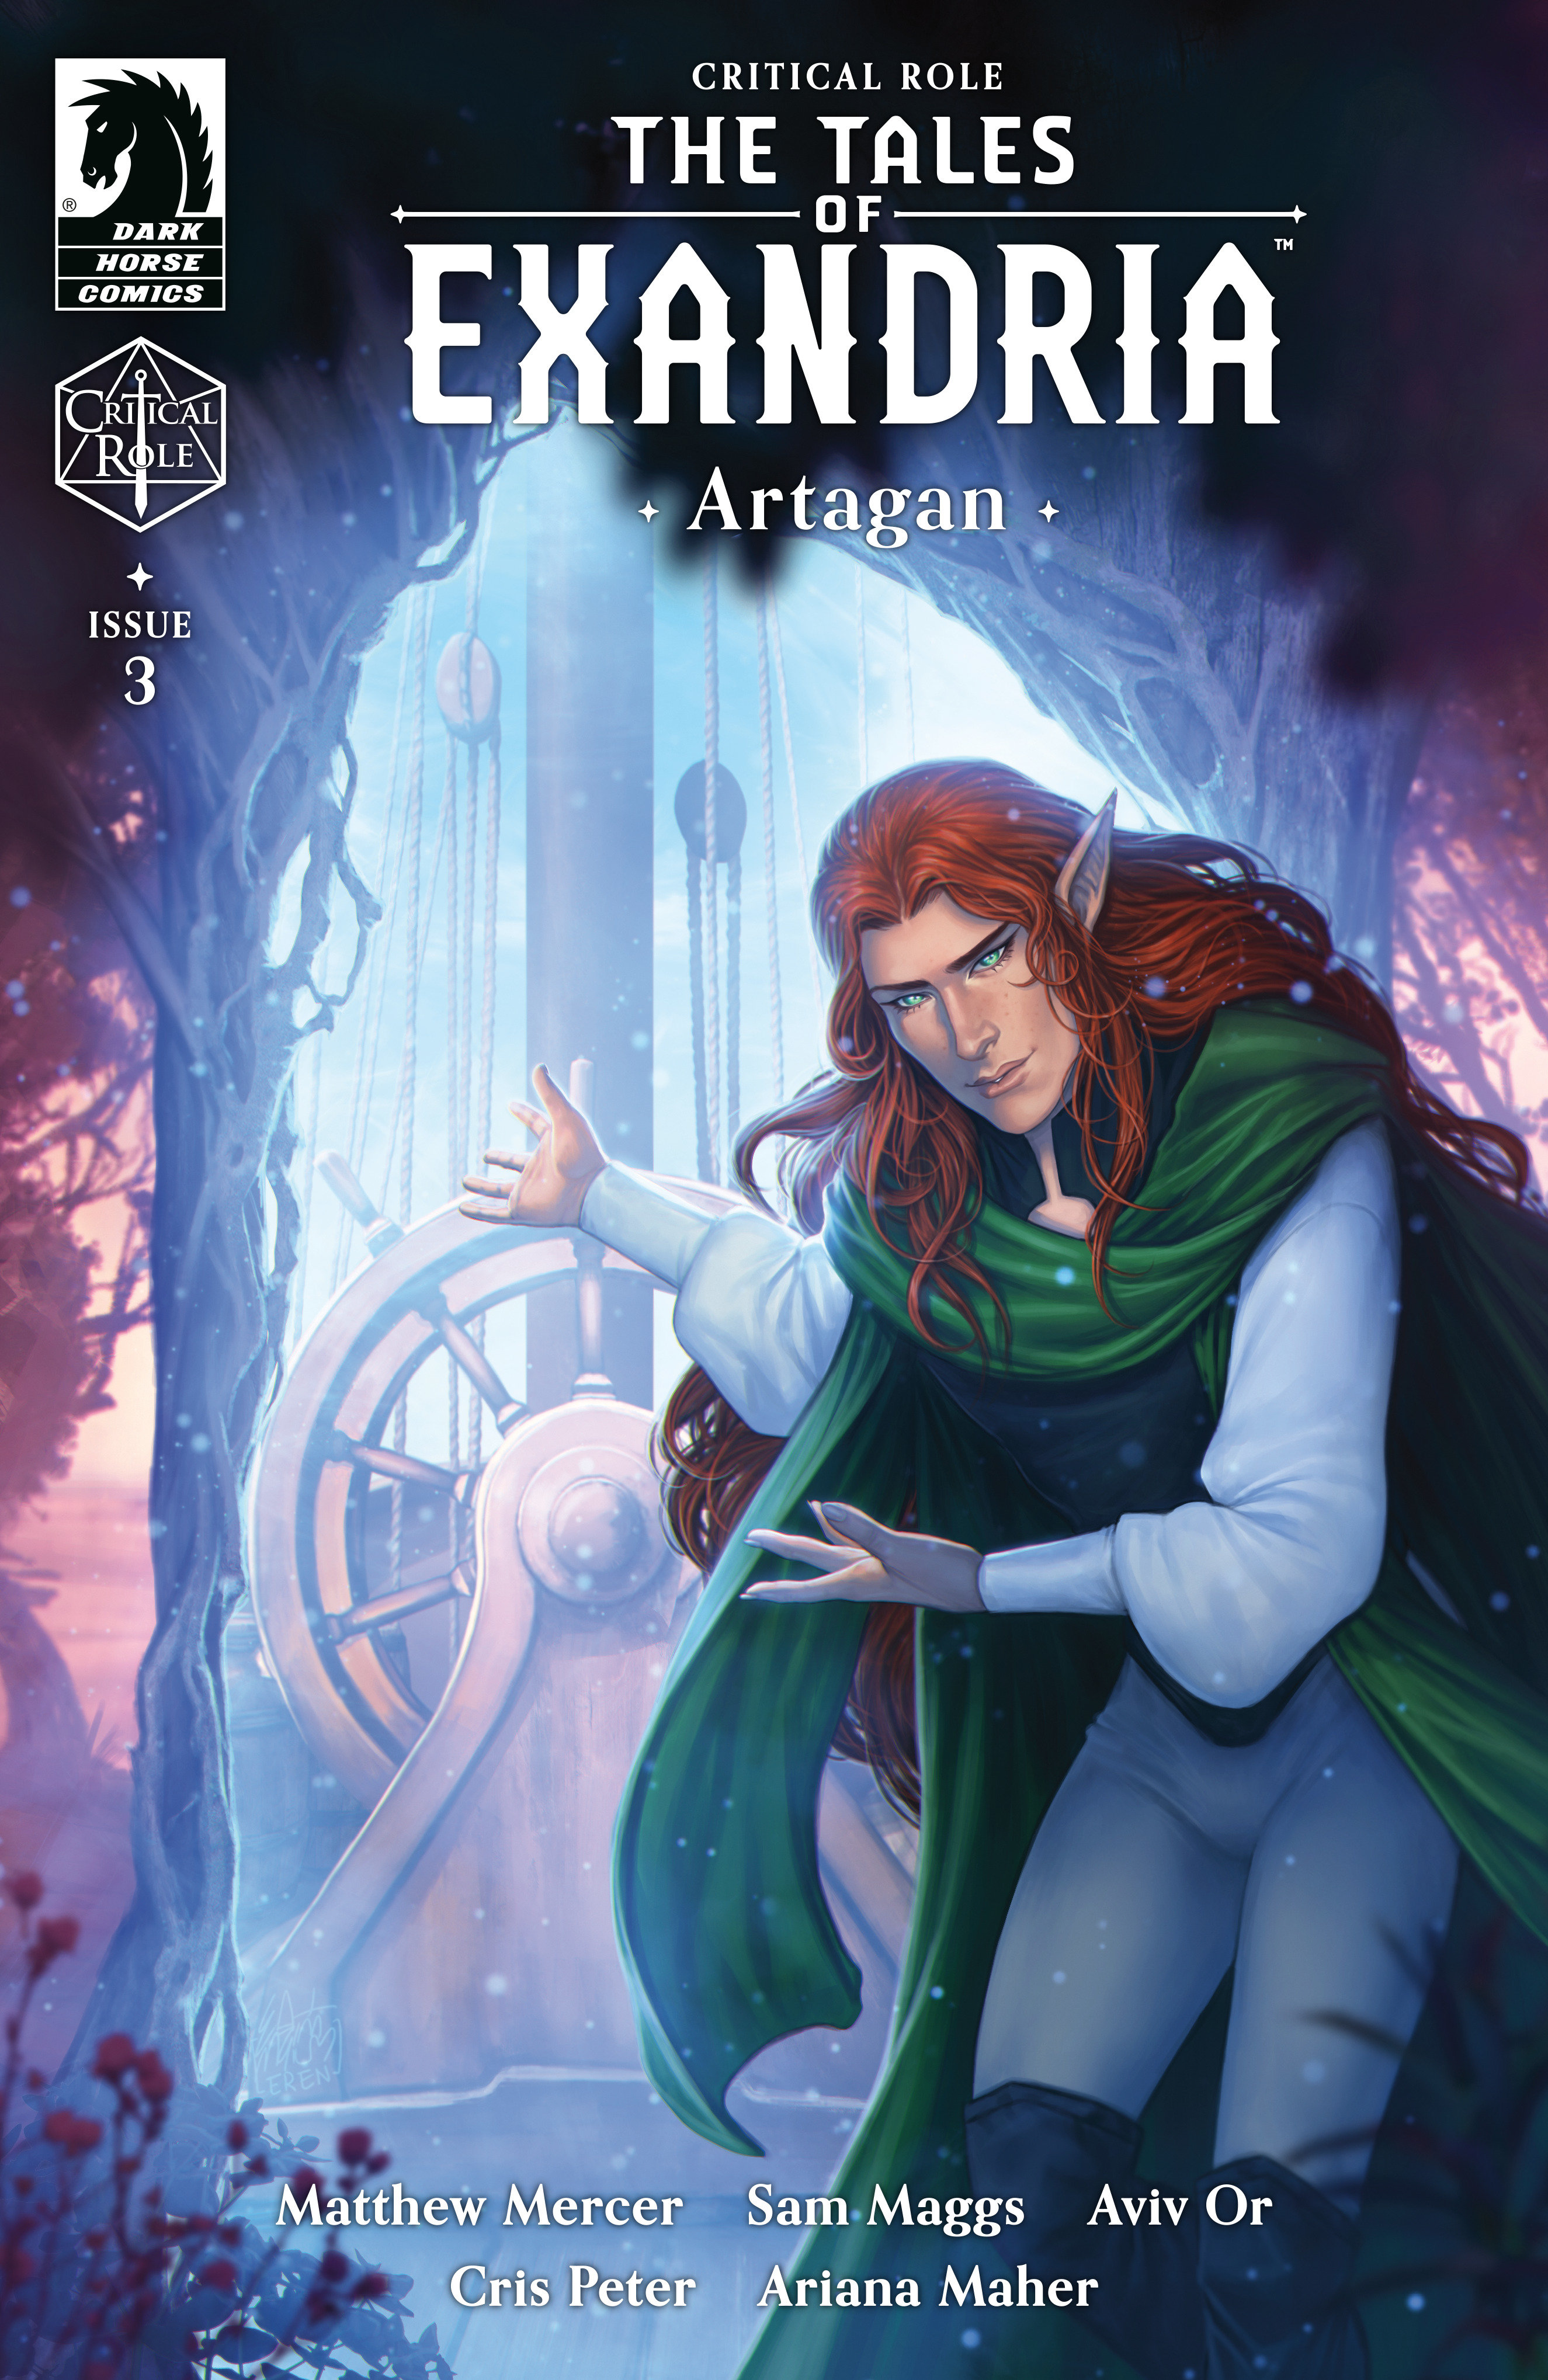 Critical Role Tales of Exandria II Artagan #3 Cover A (Toby Sharp)